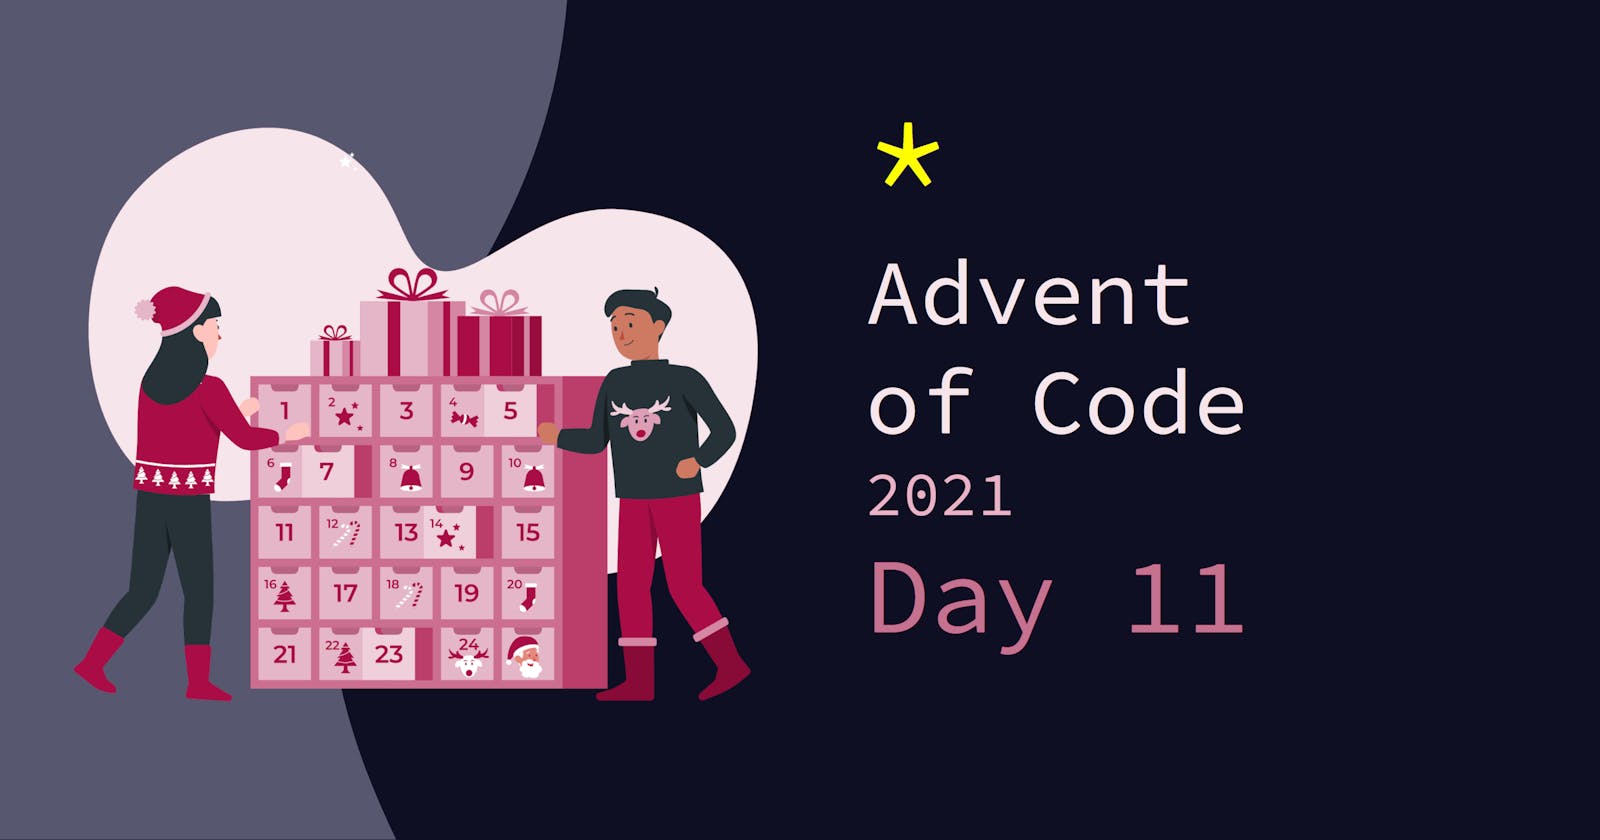 Advent of Code 2021: Day 11